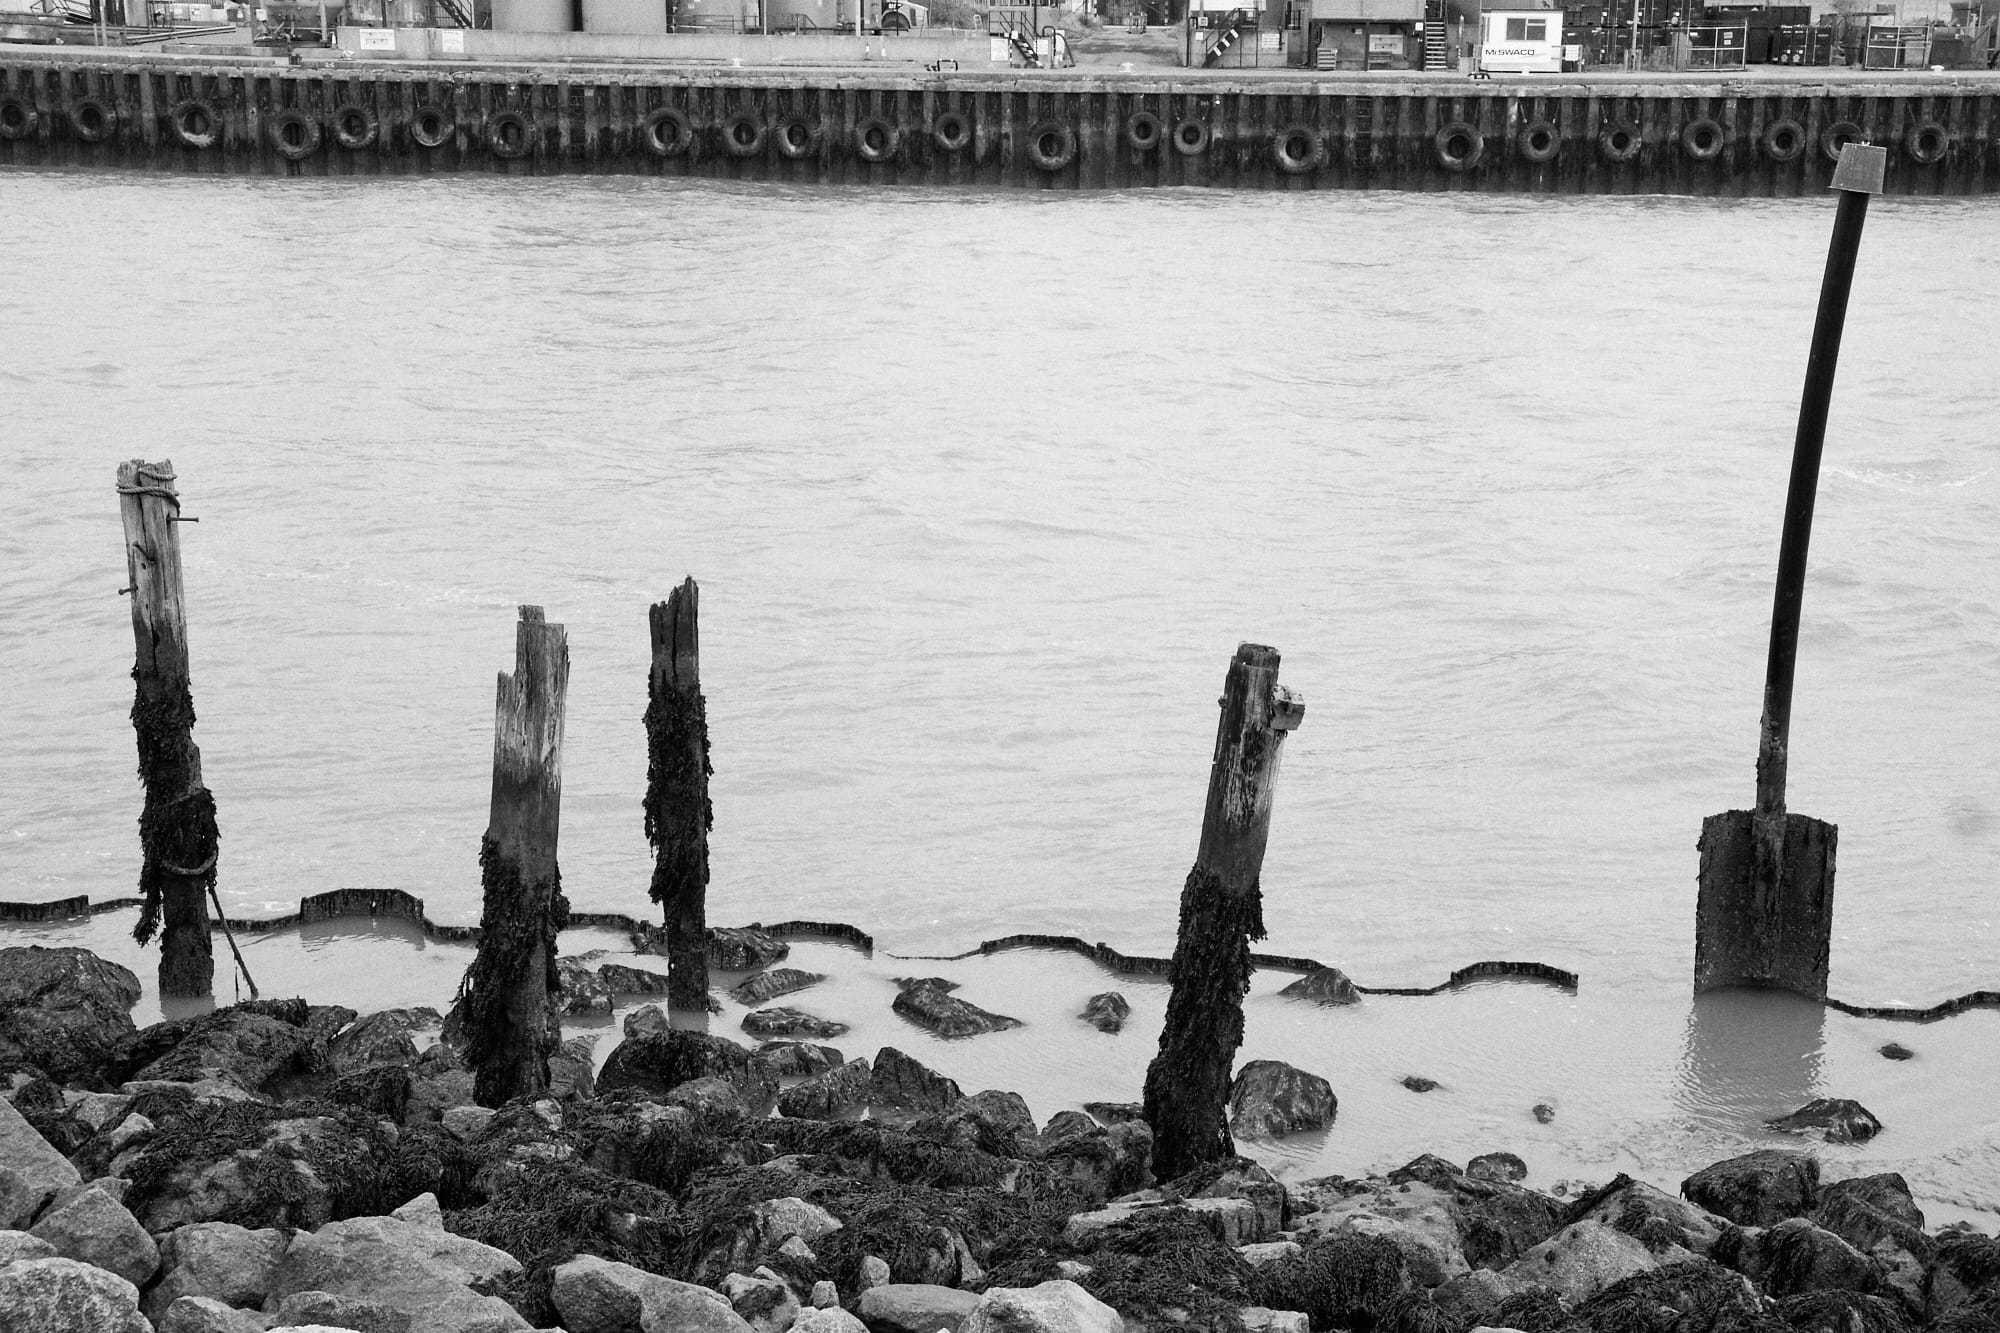 posts at the side of the River Yare